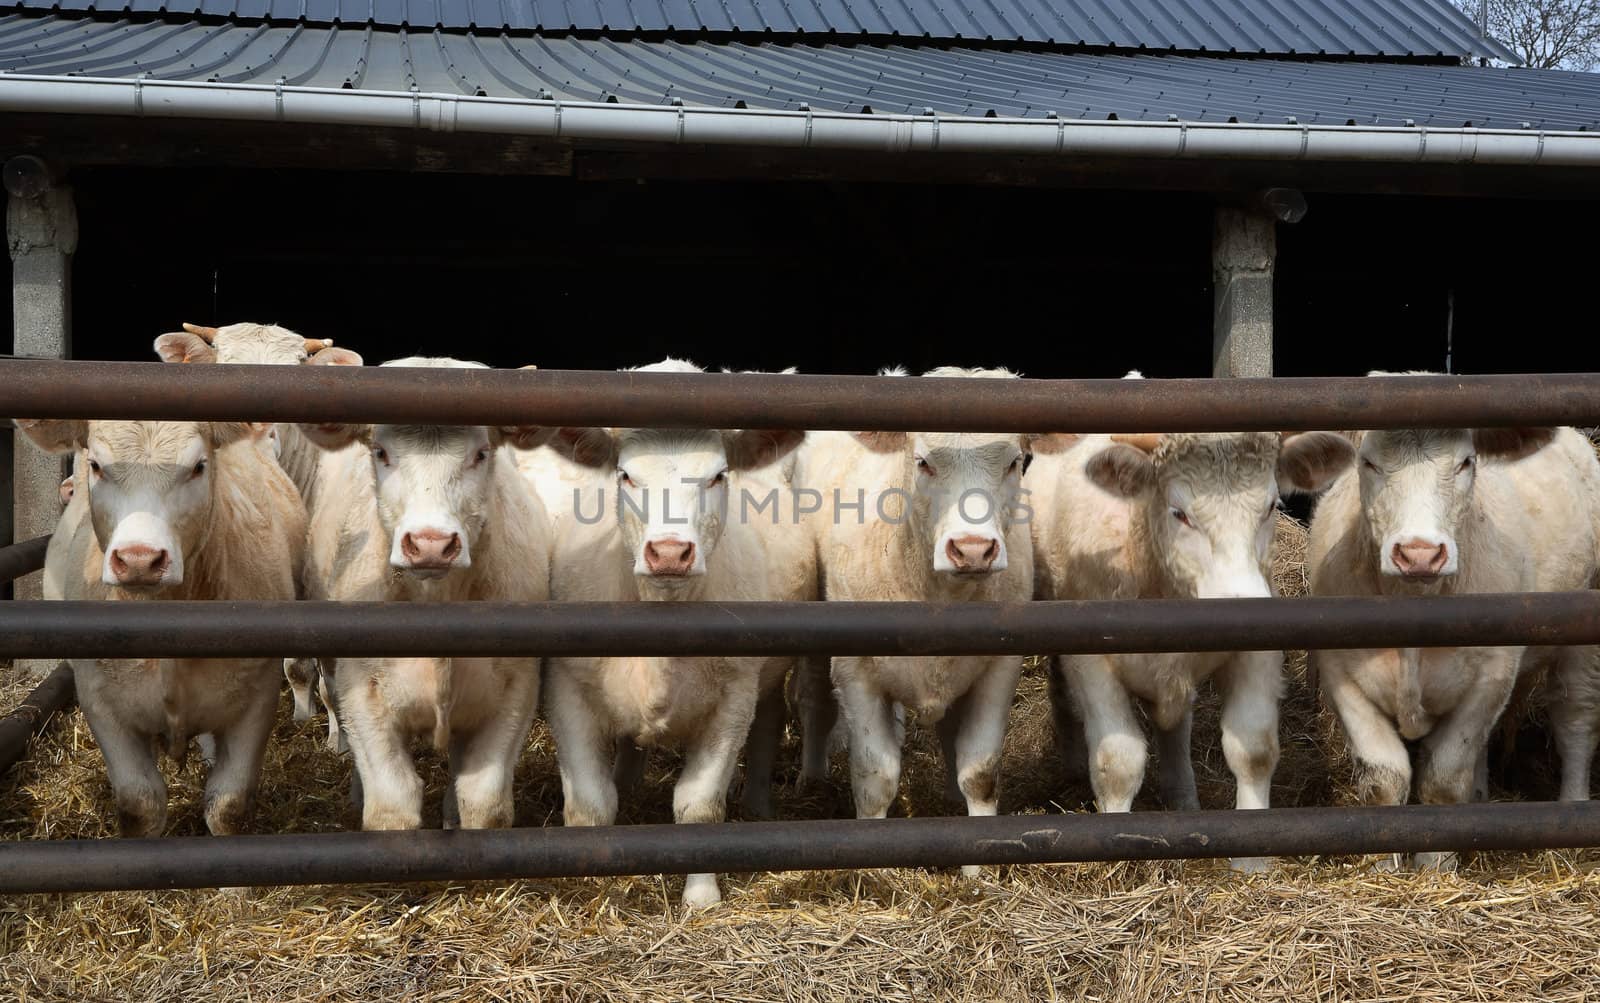 Some white cows look in a camera